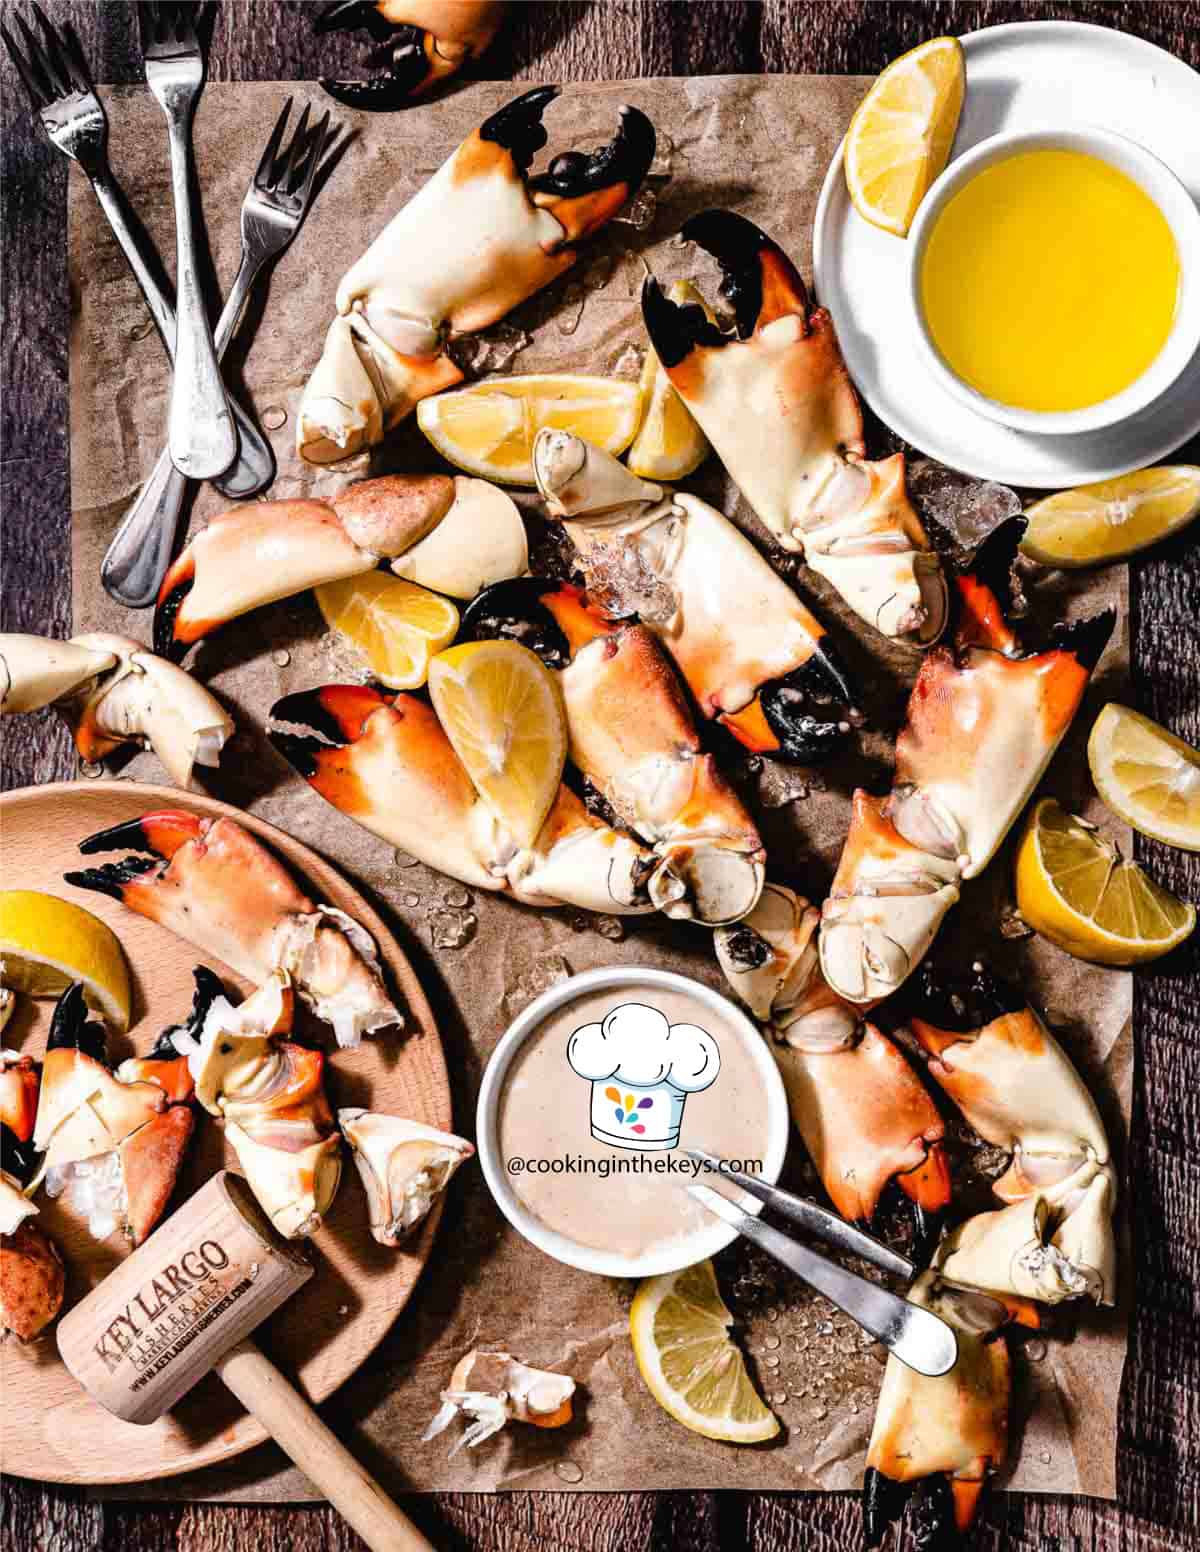 Stone crabs with mustard sauce on a board.